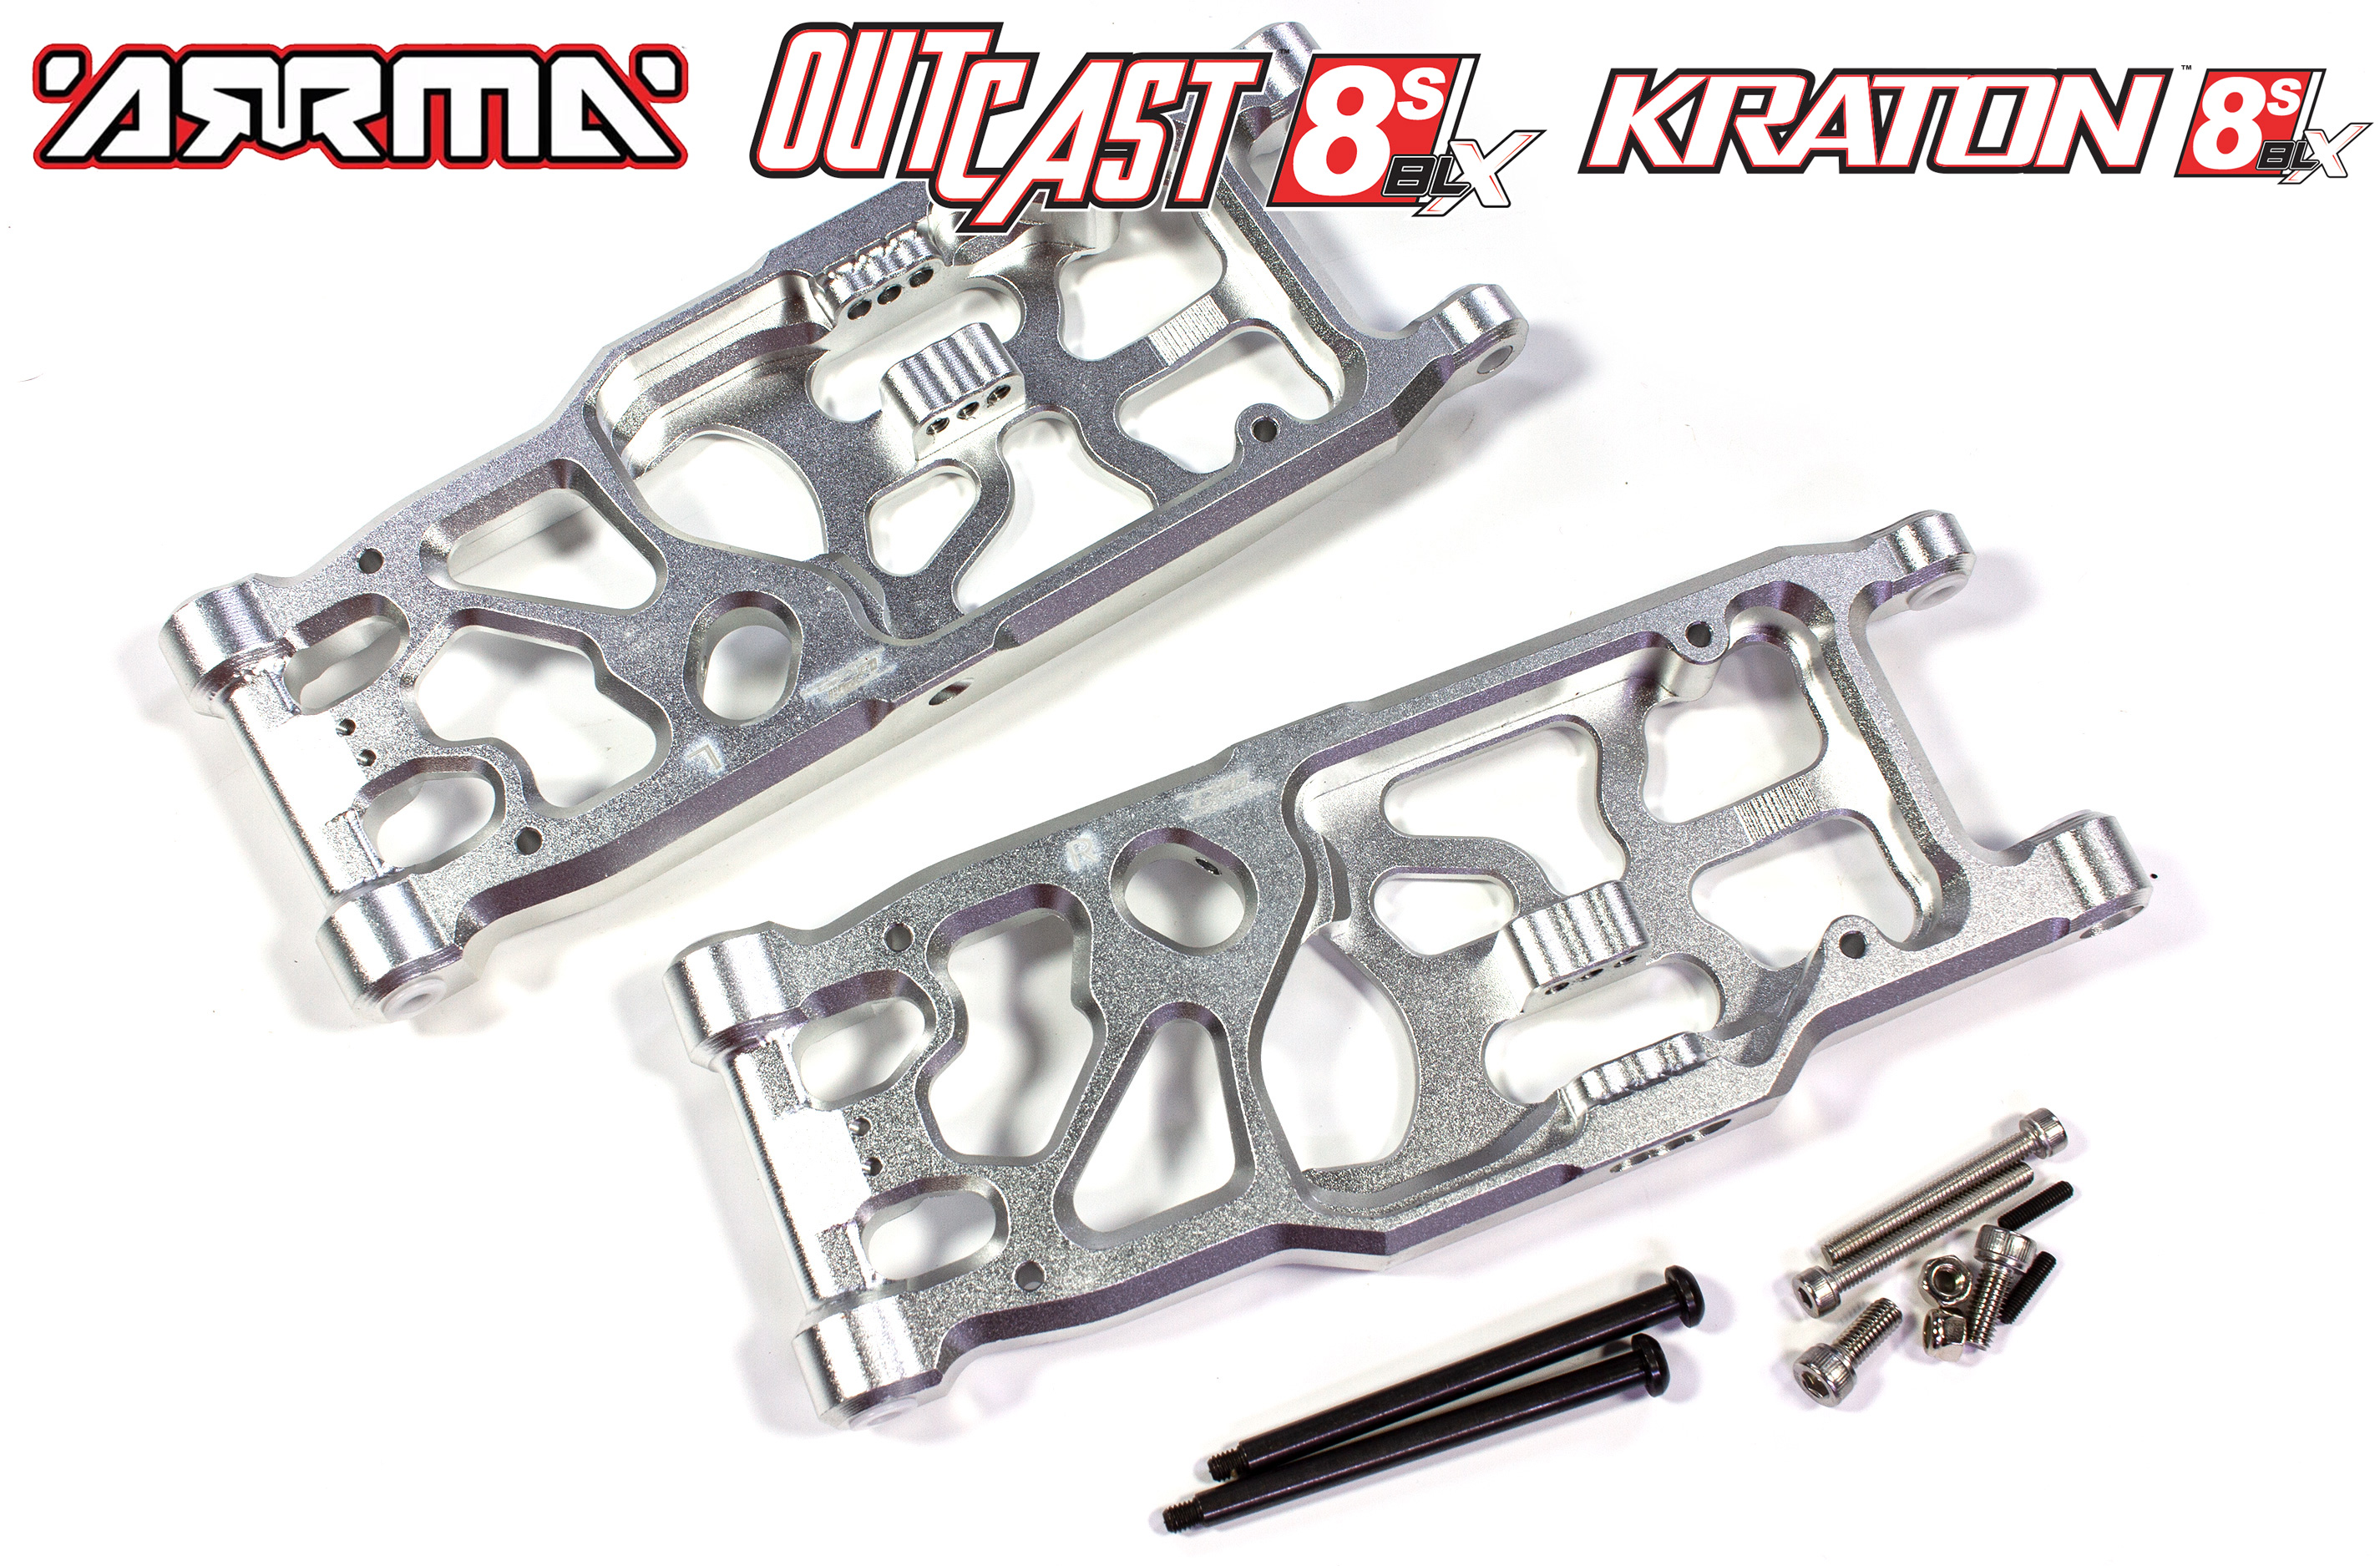 AKX056 GPM rear lower aluminum a-arms for Arrma Kraton / Outcast 8S